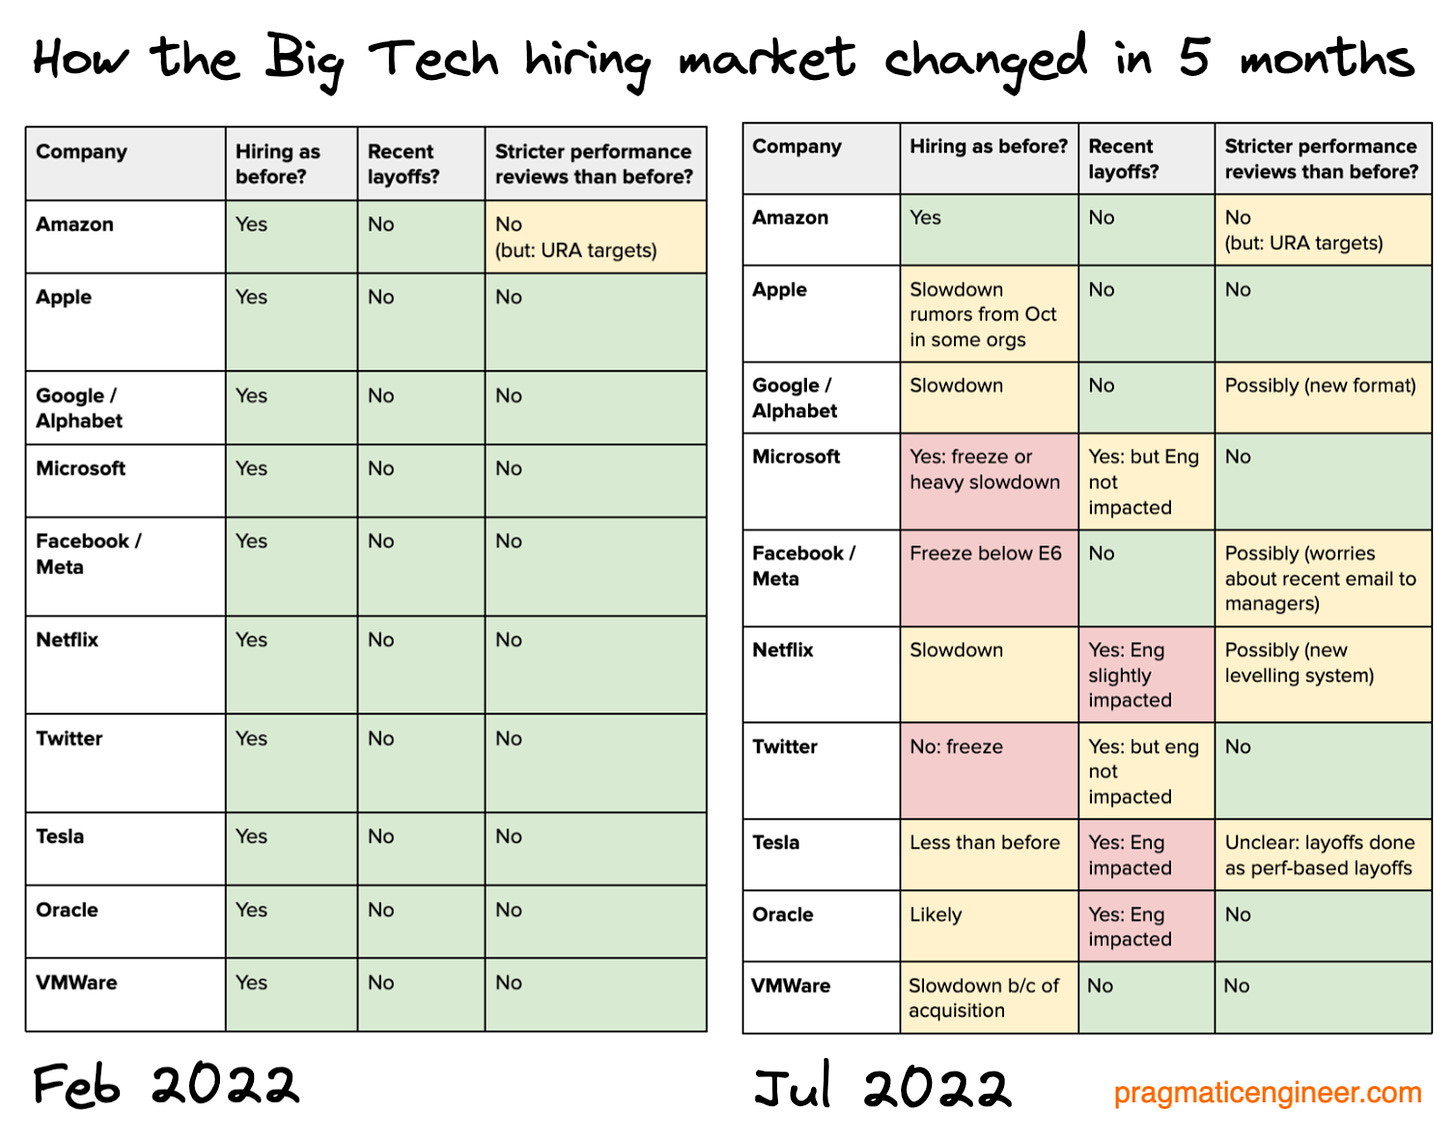 The Big Tech hiring market has considerably cooled over the past few months.